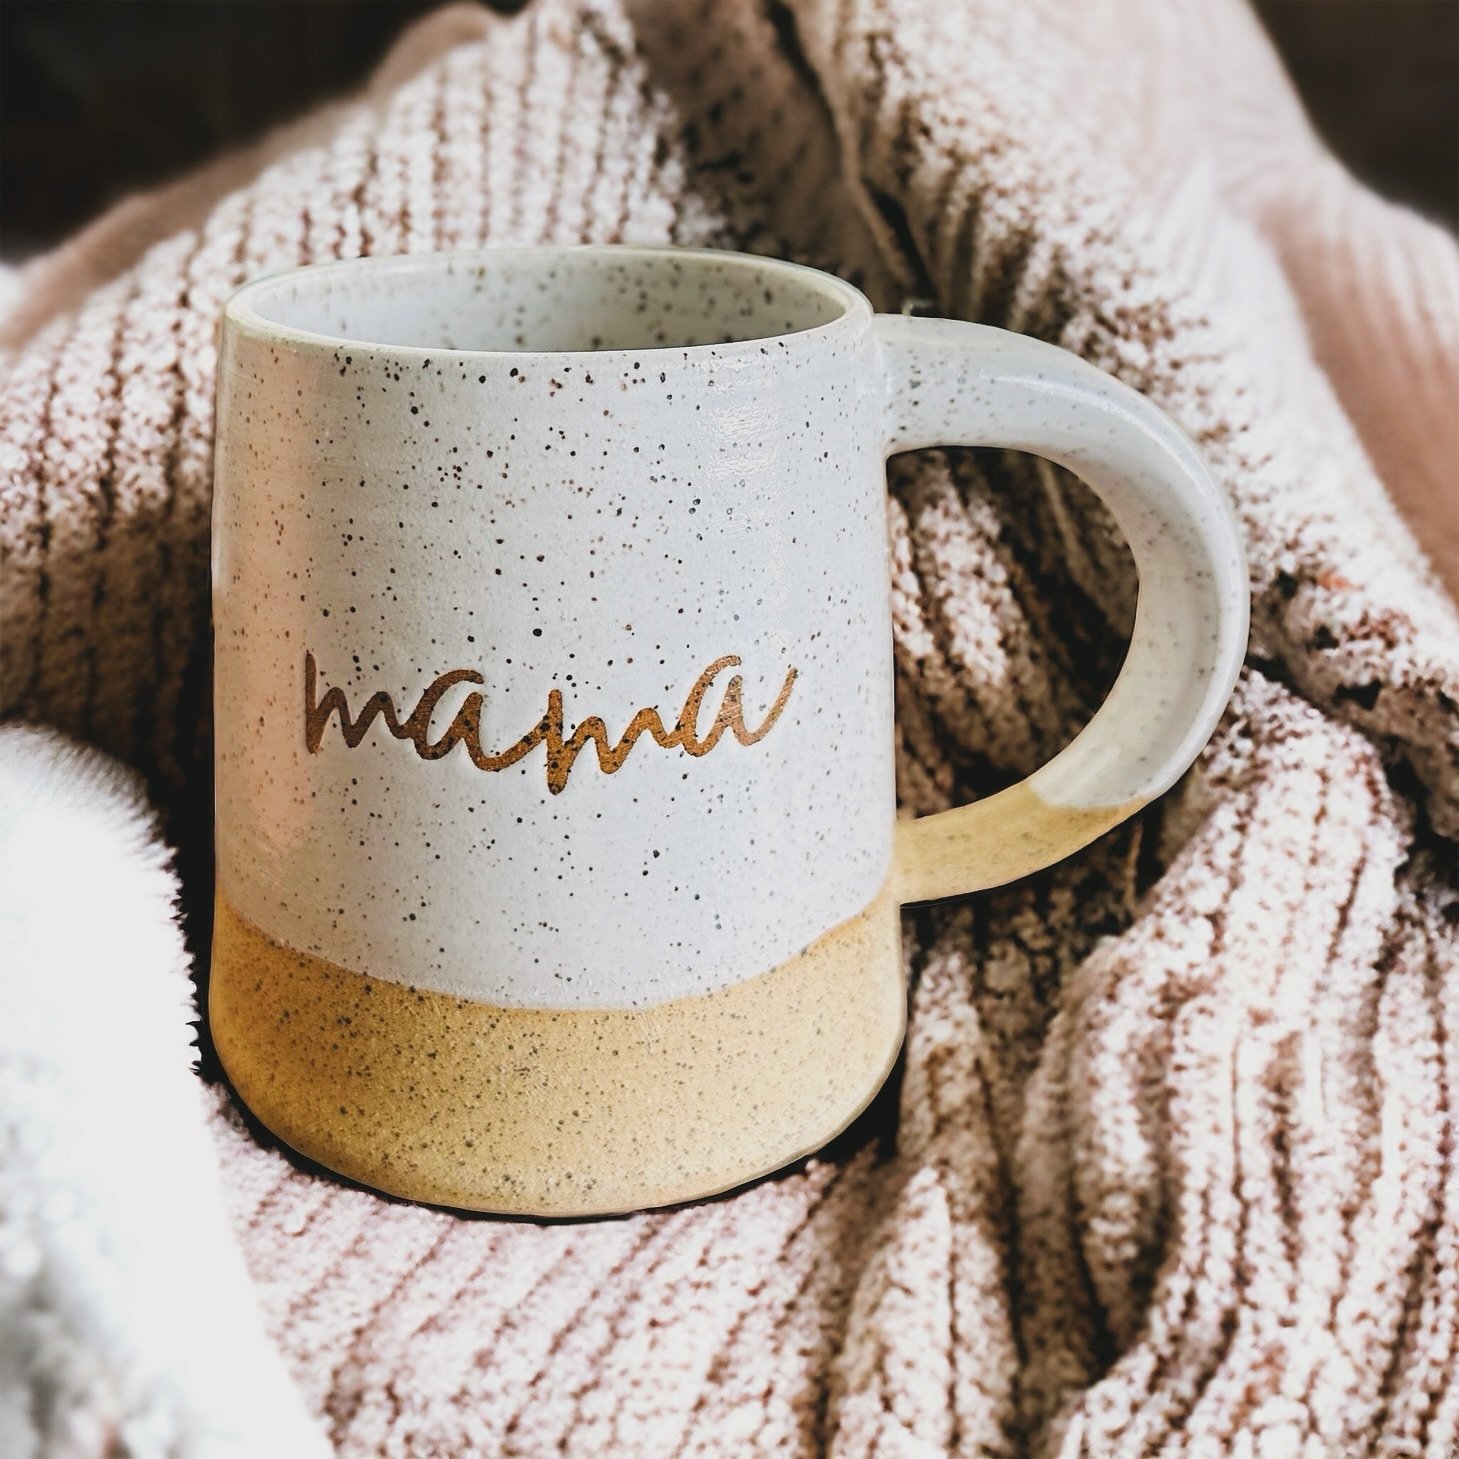 ☕️ your mom wants coffee not flowers ☕️ 

✨ sending love to all the mamas this mother&rsquo;s day ✨

#mama #mothersday #mothersdaygift